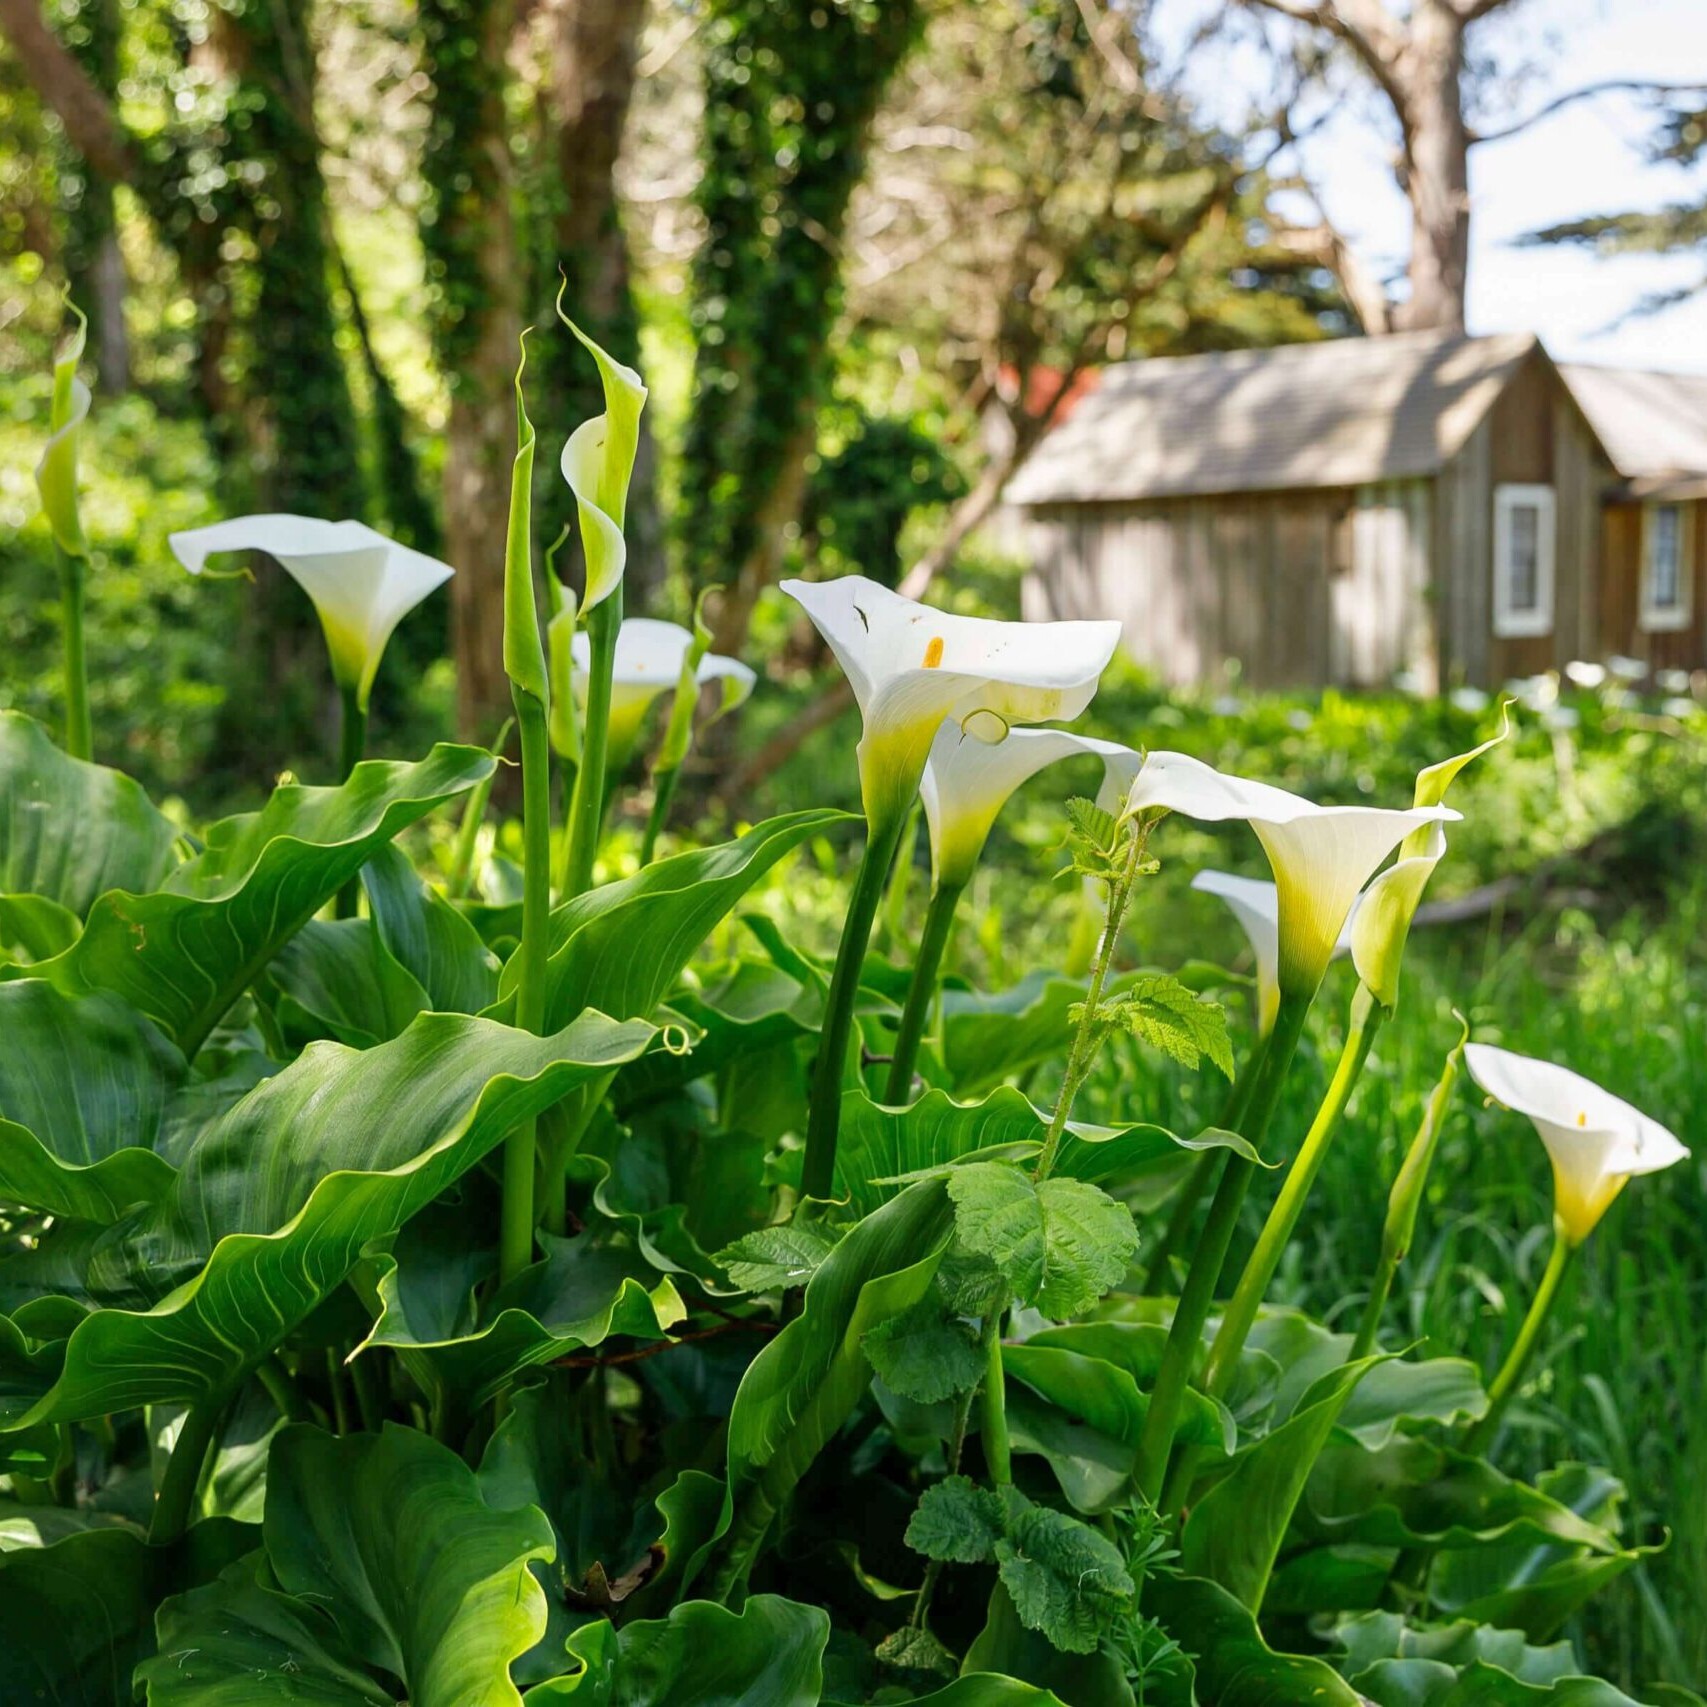 Greenery and white flowers in the foreground with a small wooden cabin out of focus in the background.